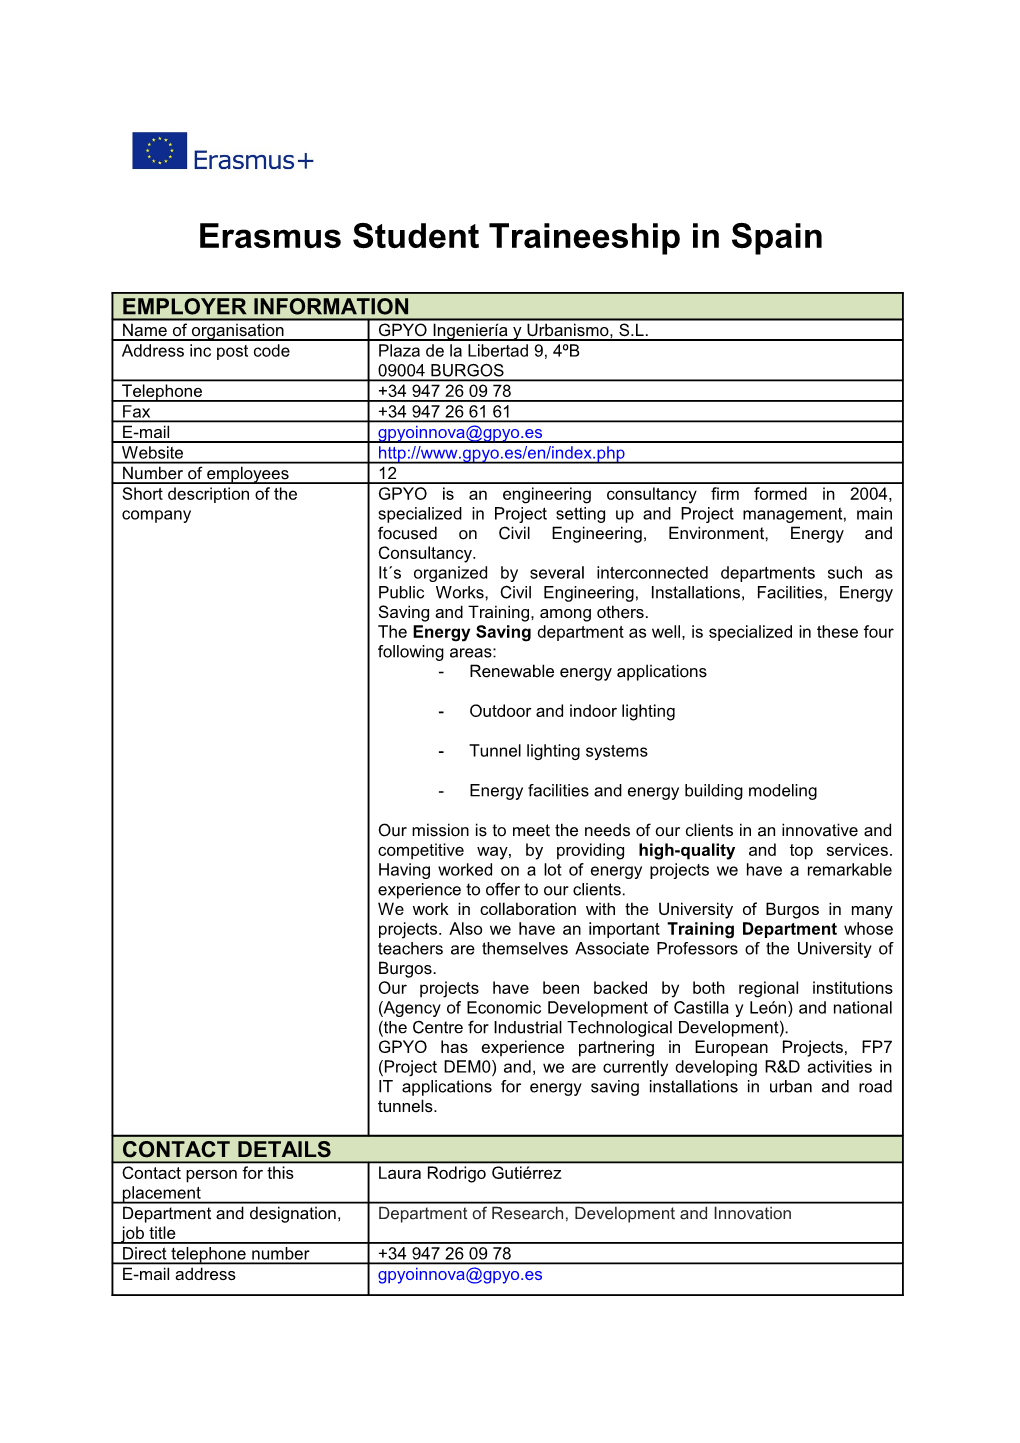 Erasmus Student Work Placement in the UK s5